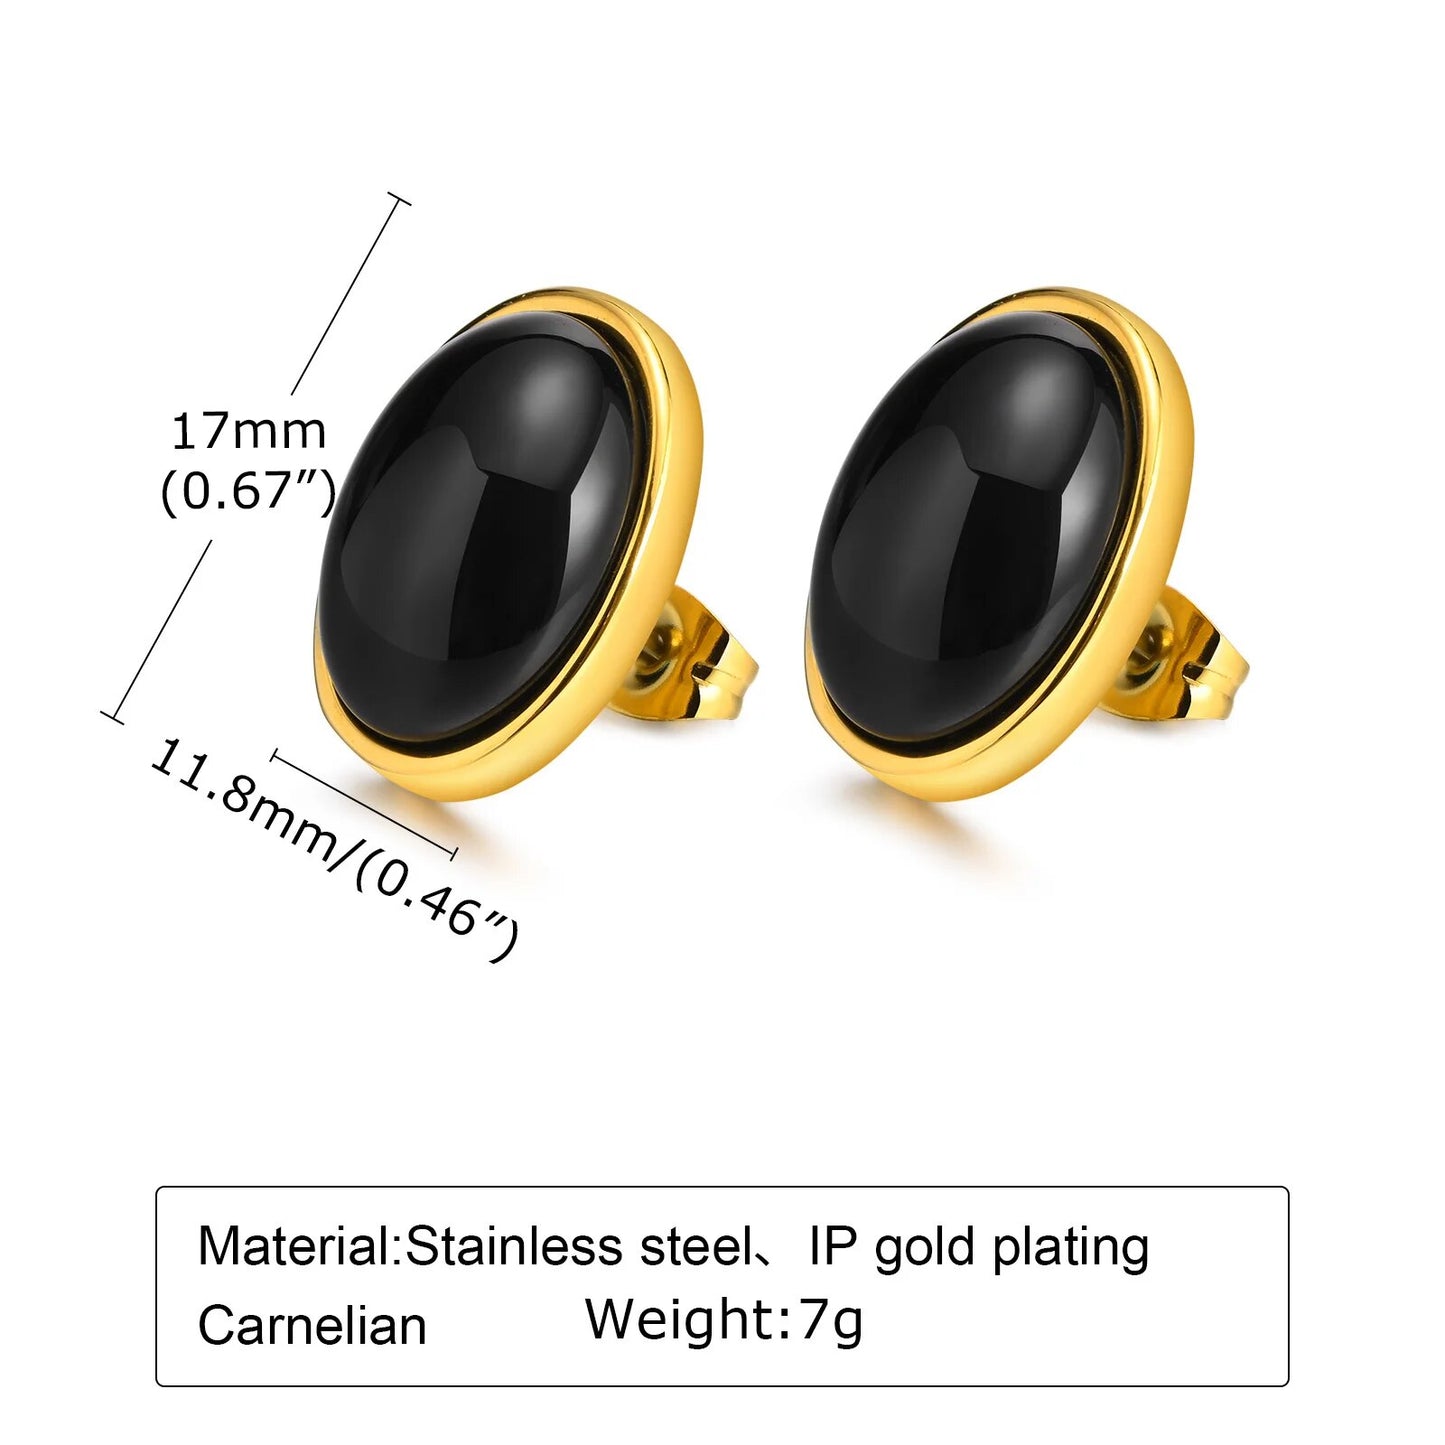 Women's Earrings Aretes para mujeres Retro Oval Black Natural Stone Stud Earrings for Women Gifts Jewelry, Gold Color Stainless Steel Ear Fashion Accessory